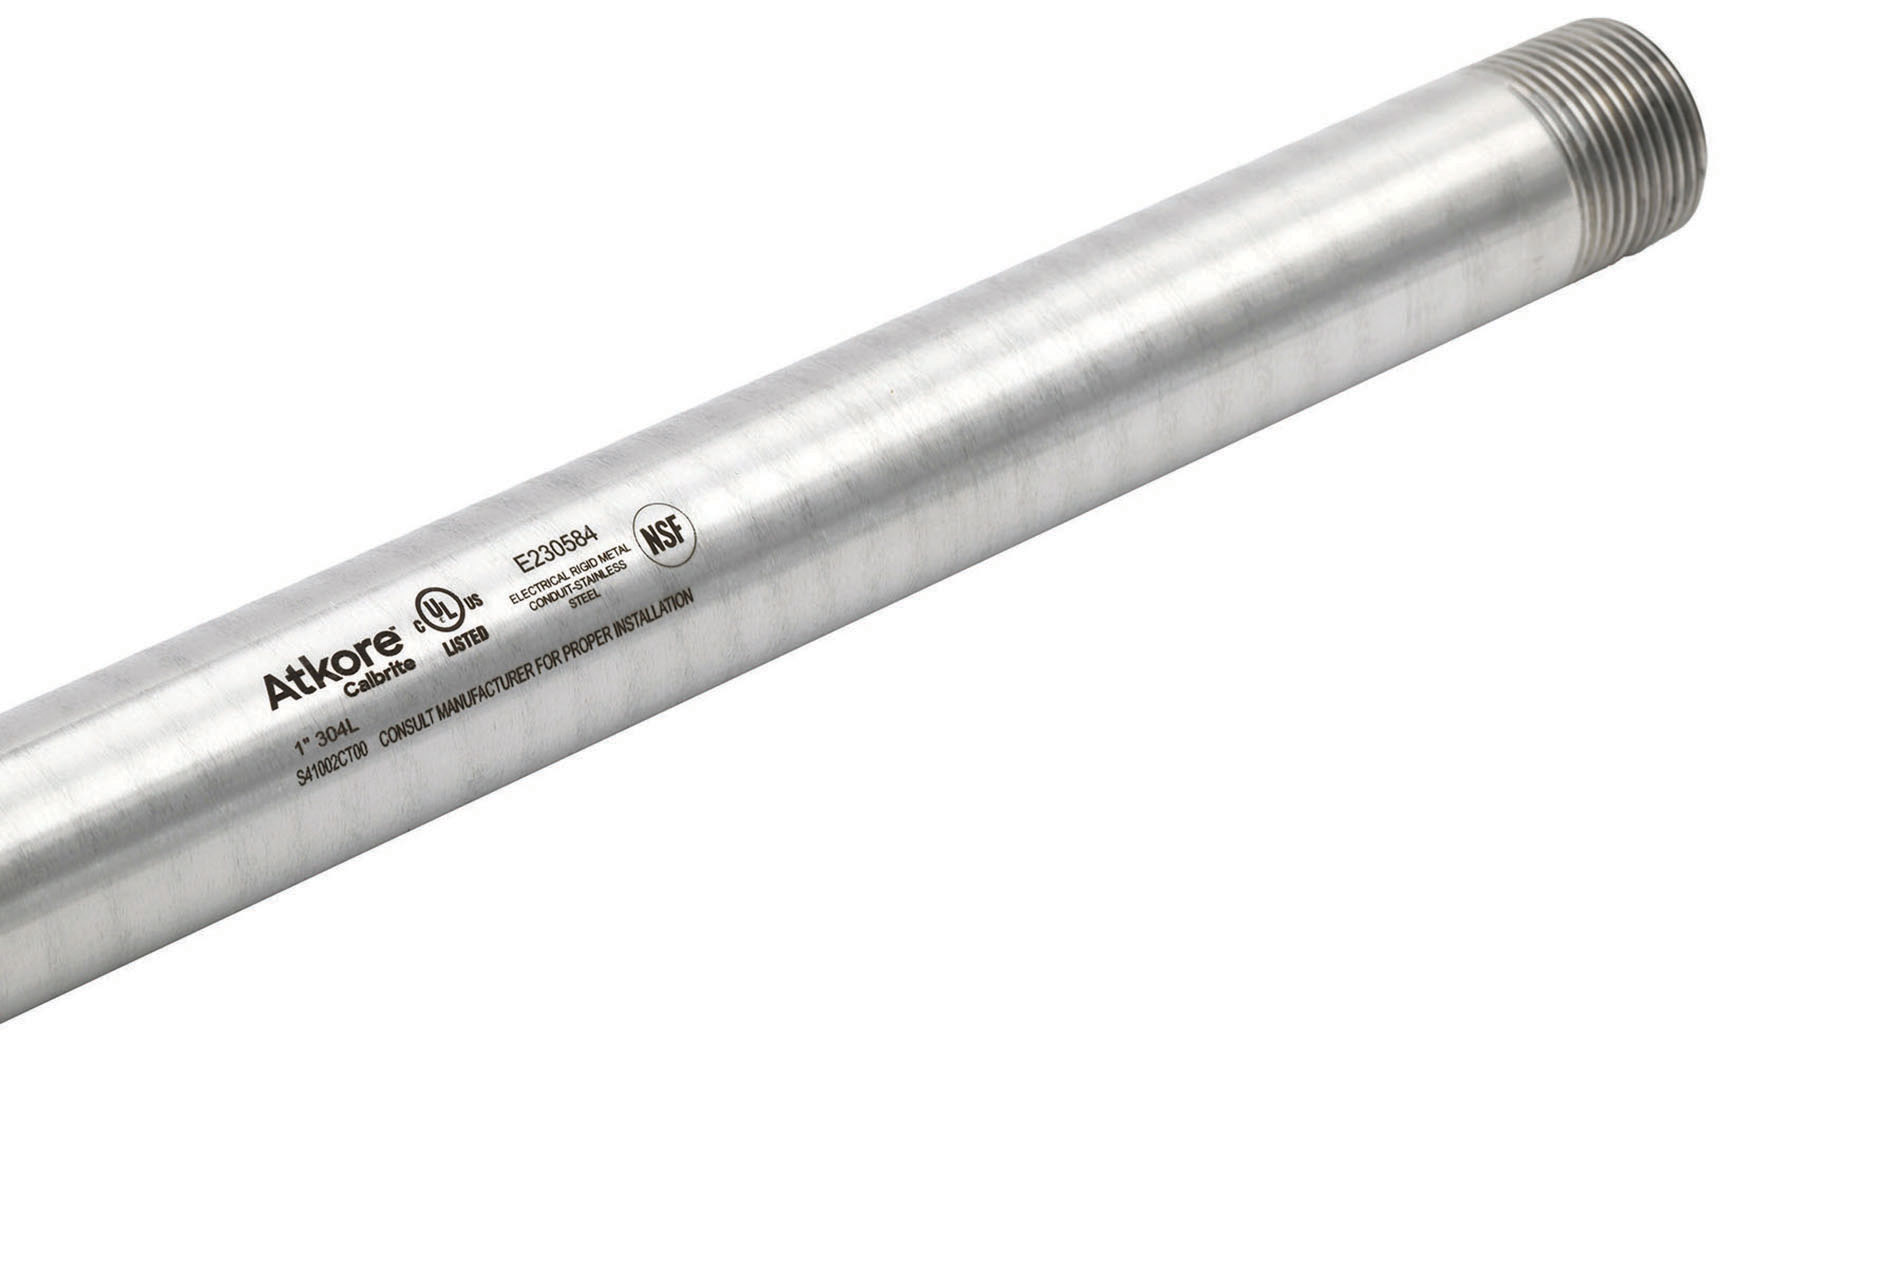 Metal laser-marked conduit. Image by Atkore.